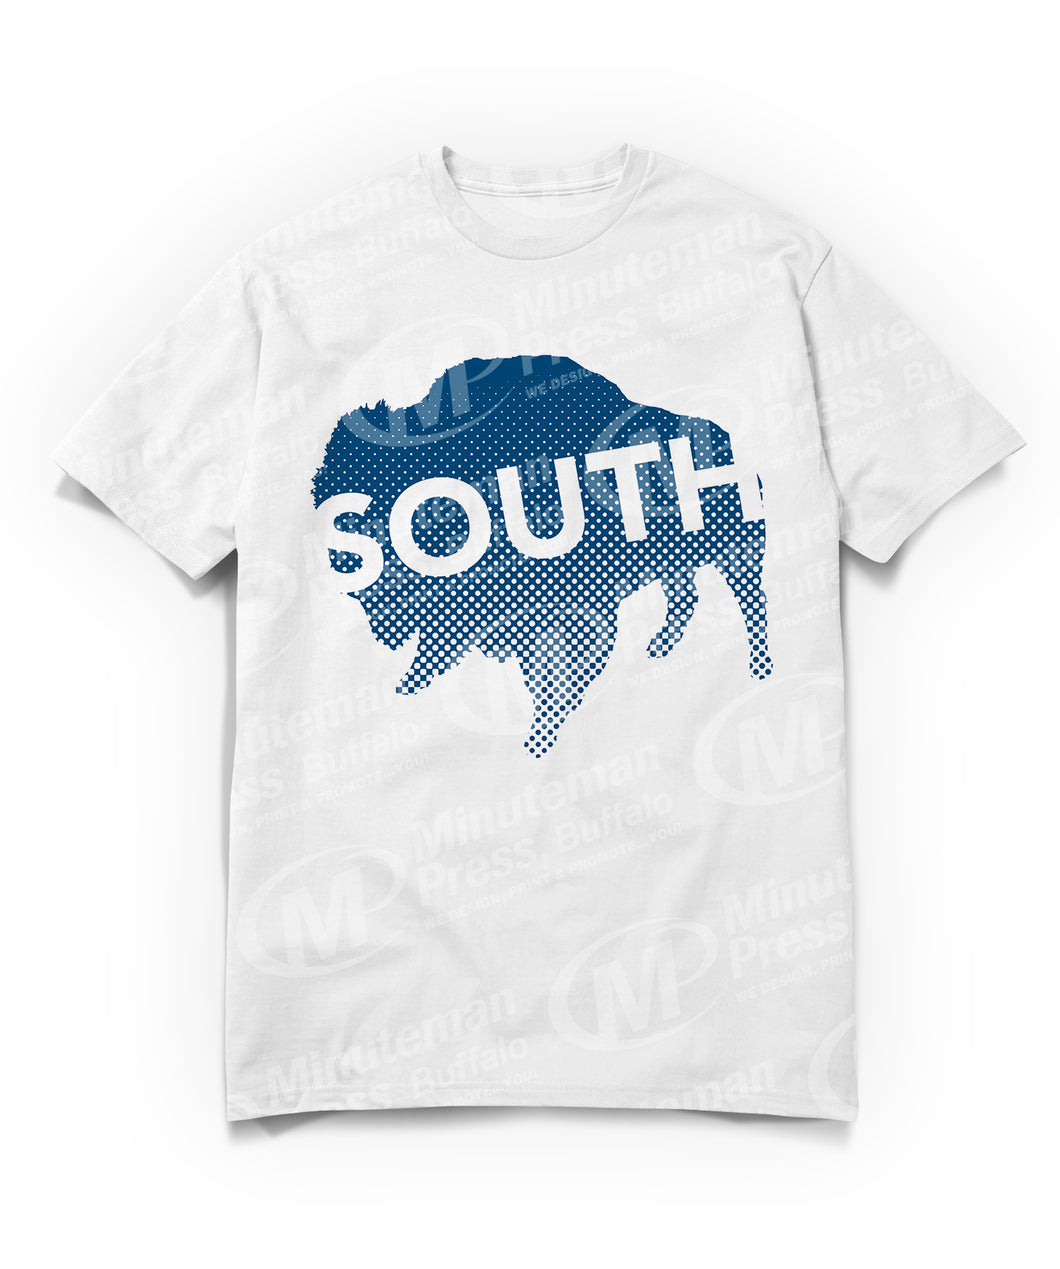 south text on navy blue buffalo on white t-shirt